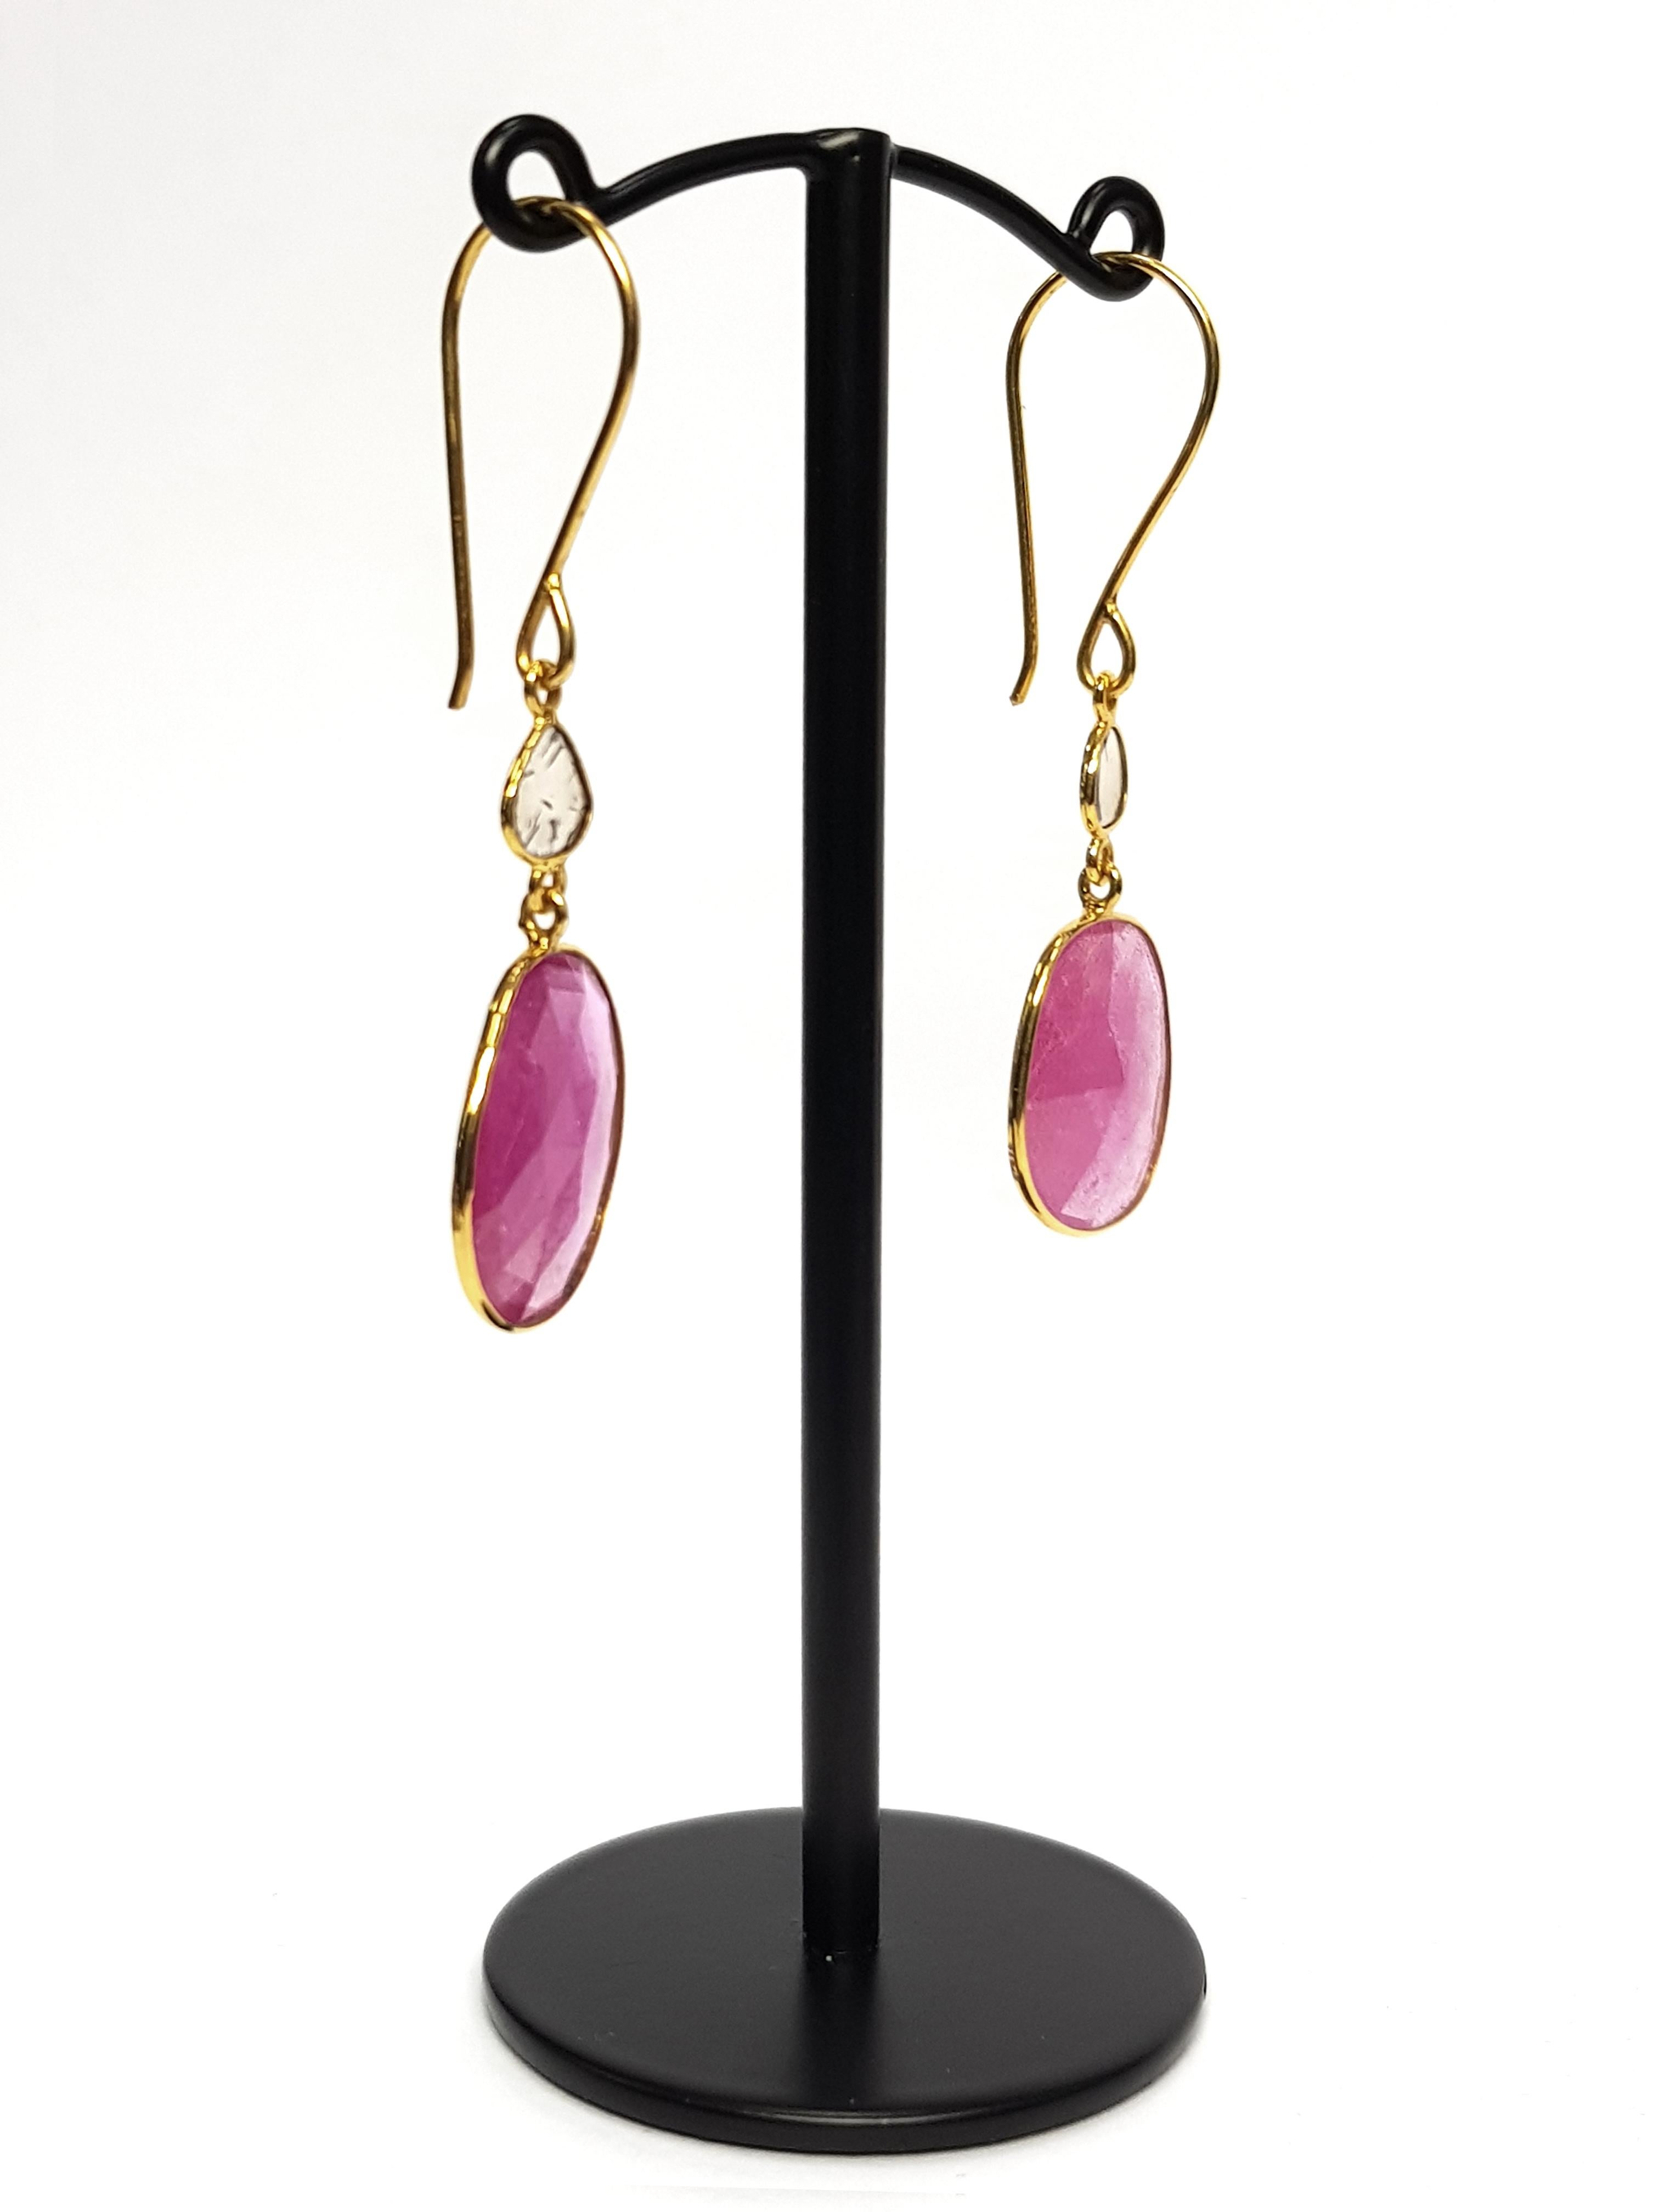 13.55 Carats Rose Cut Ruby Diamond 18 Karat Yellow Gold Artisan Earrings  In New Condition For Sale In London, GB